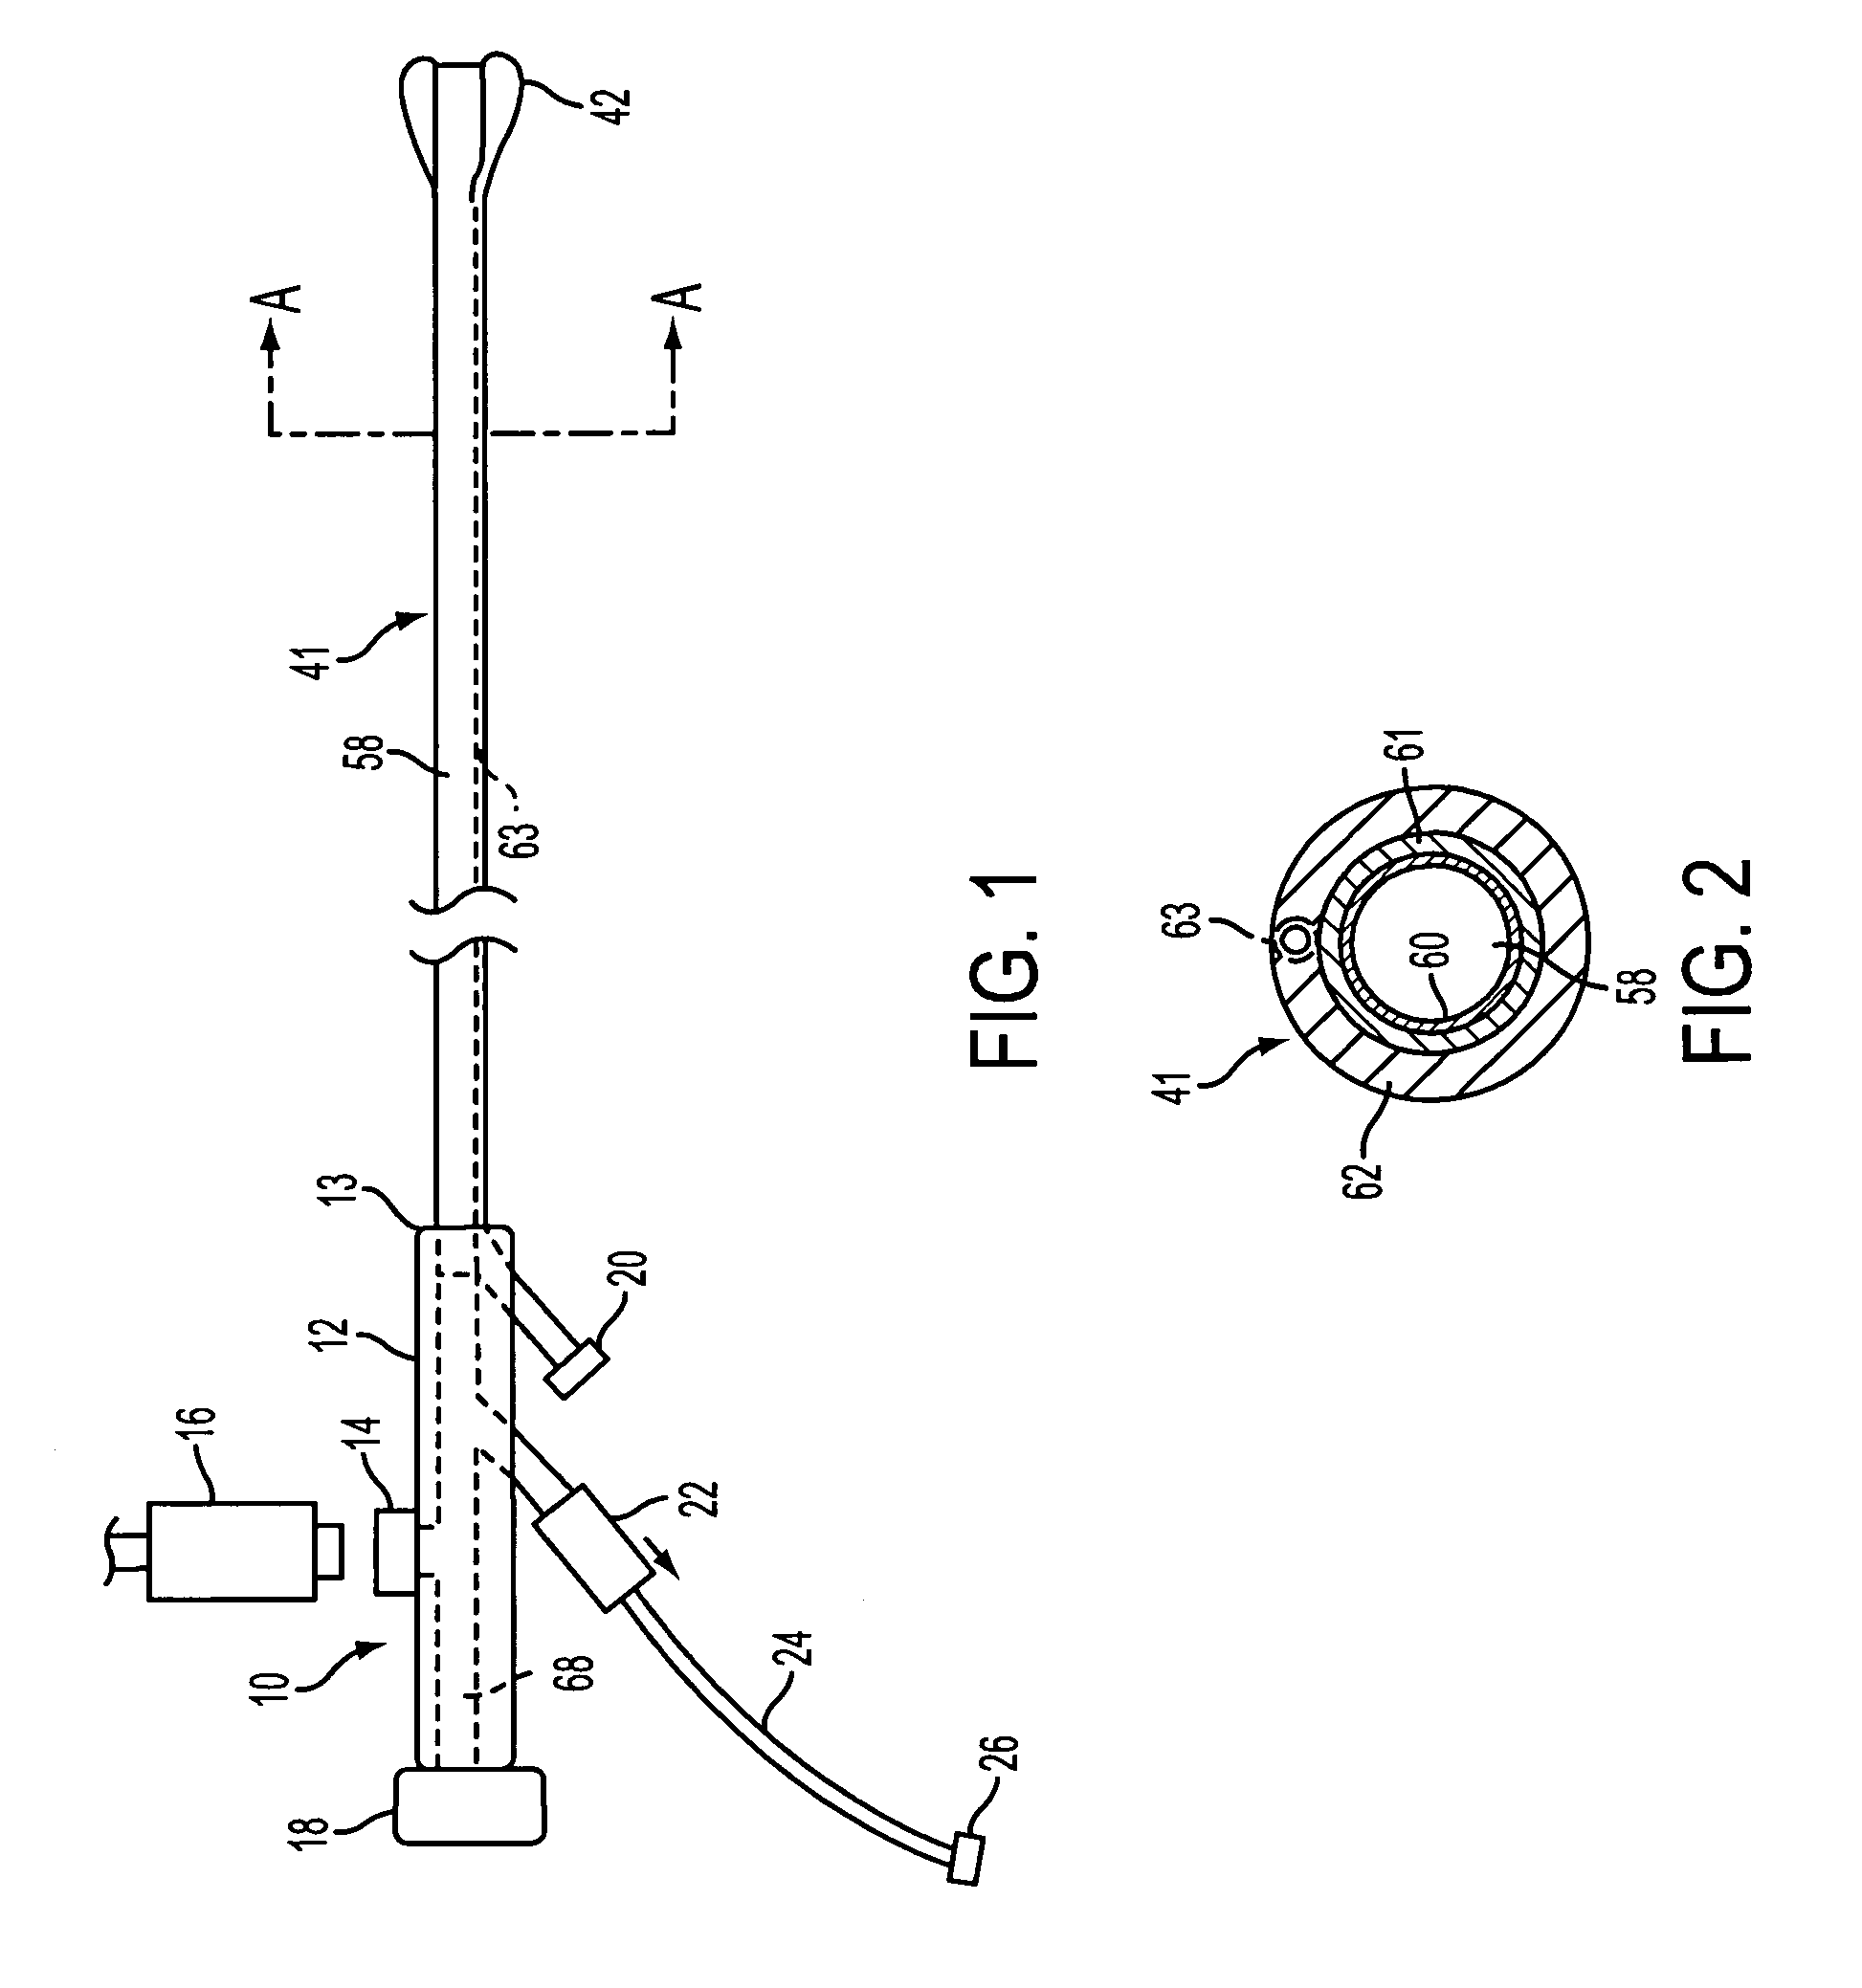 Proximal catheter assembly having a relief valve